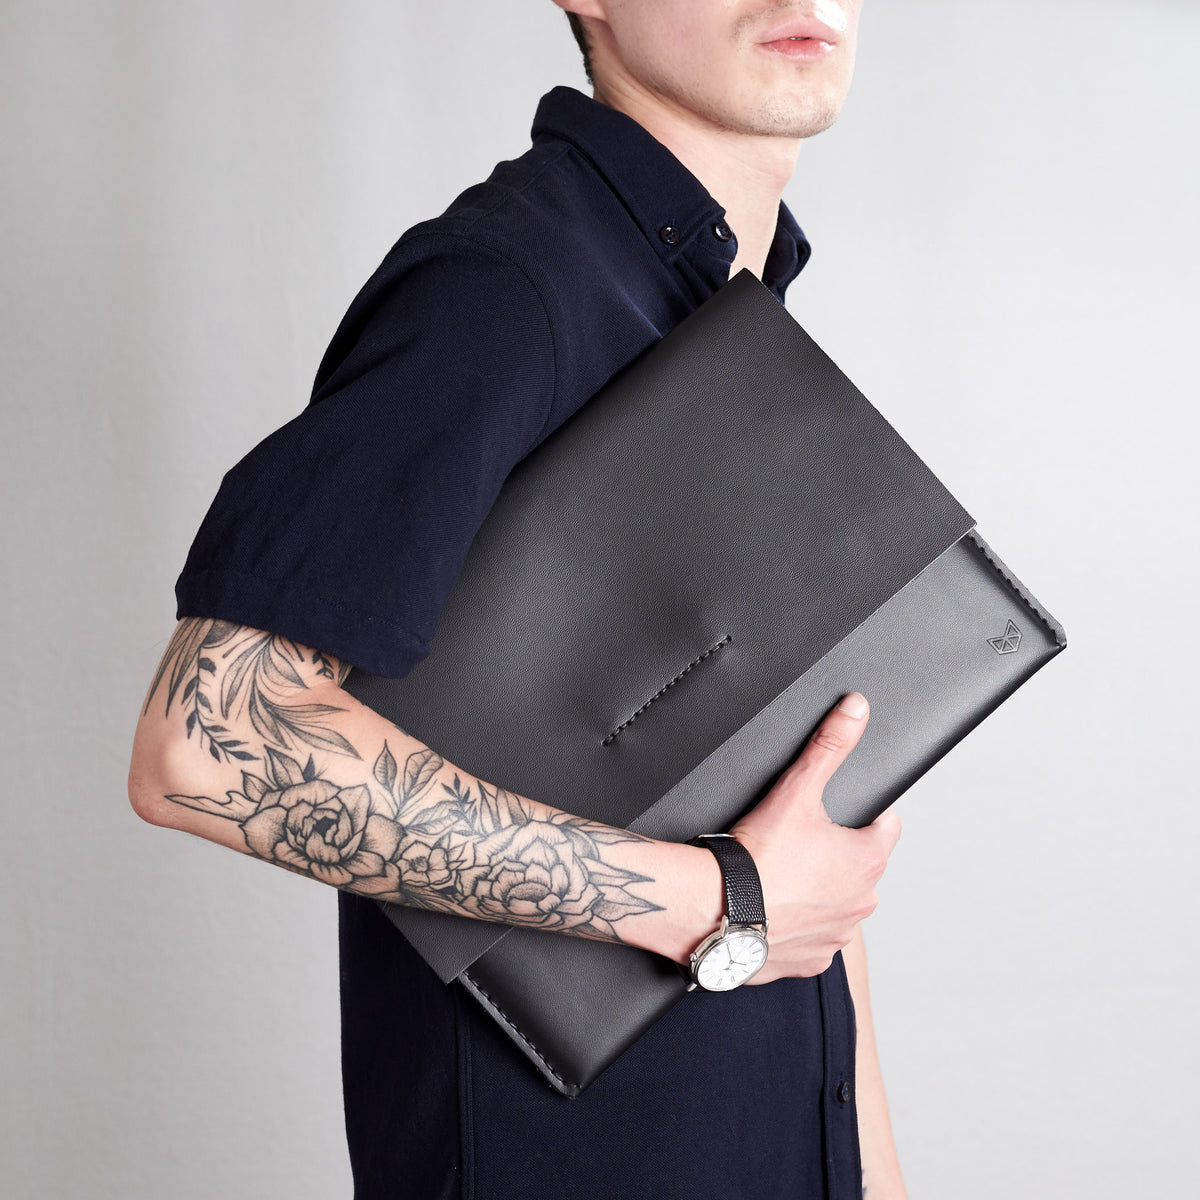 Style Front View. iPad Sleeve. Leather Case Black for iPad by Capra Leather 